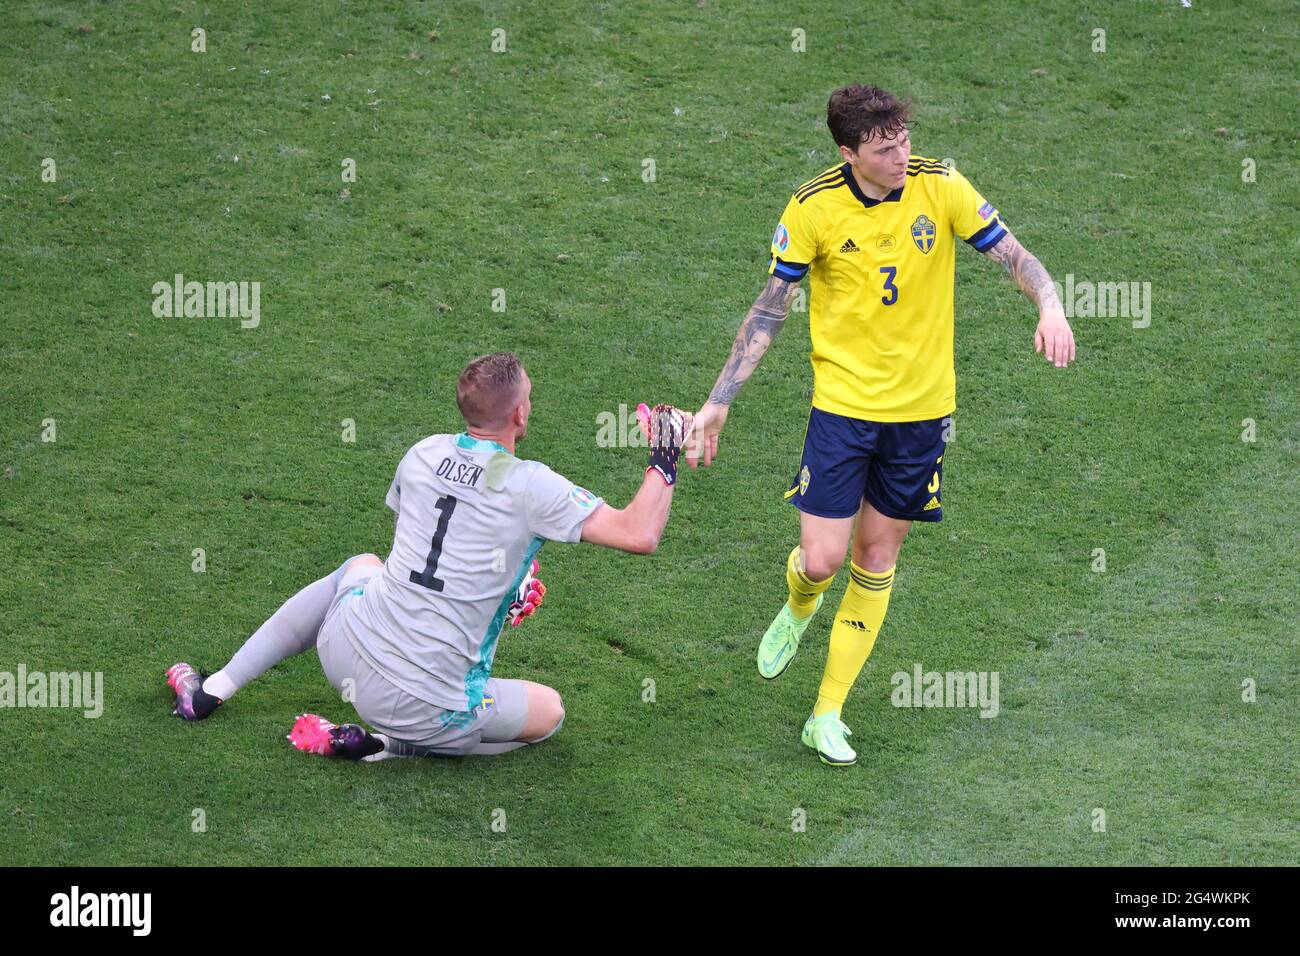 Saint Petersburg, Russia. 23rd June, 2021. Robin Olsen (1) and Victor Lindelof (3) of Sweden are seen in action during the European championship EURO 2020 between Poland and Sweden at Gazprom Arena. (Final Score; Poland 2:3 Sweden). Credit: SOPA Images Limited/Alamy Live News Stock Photo